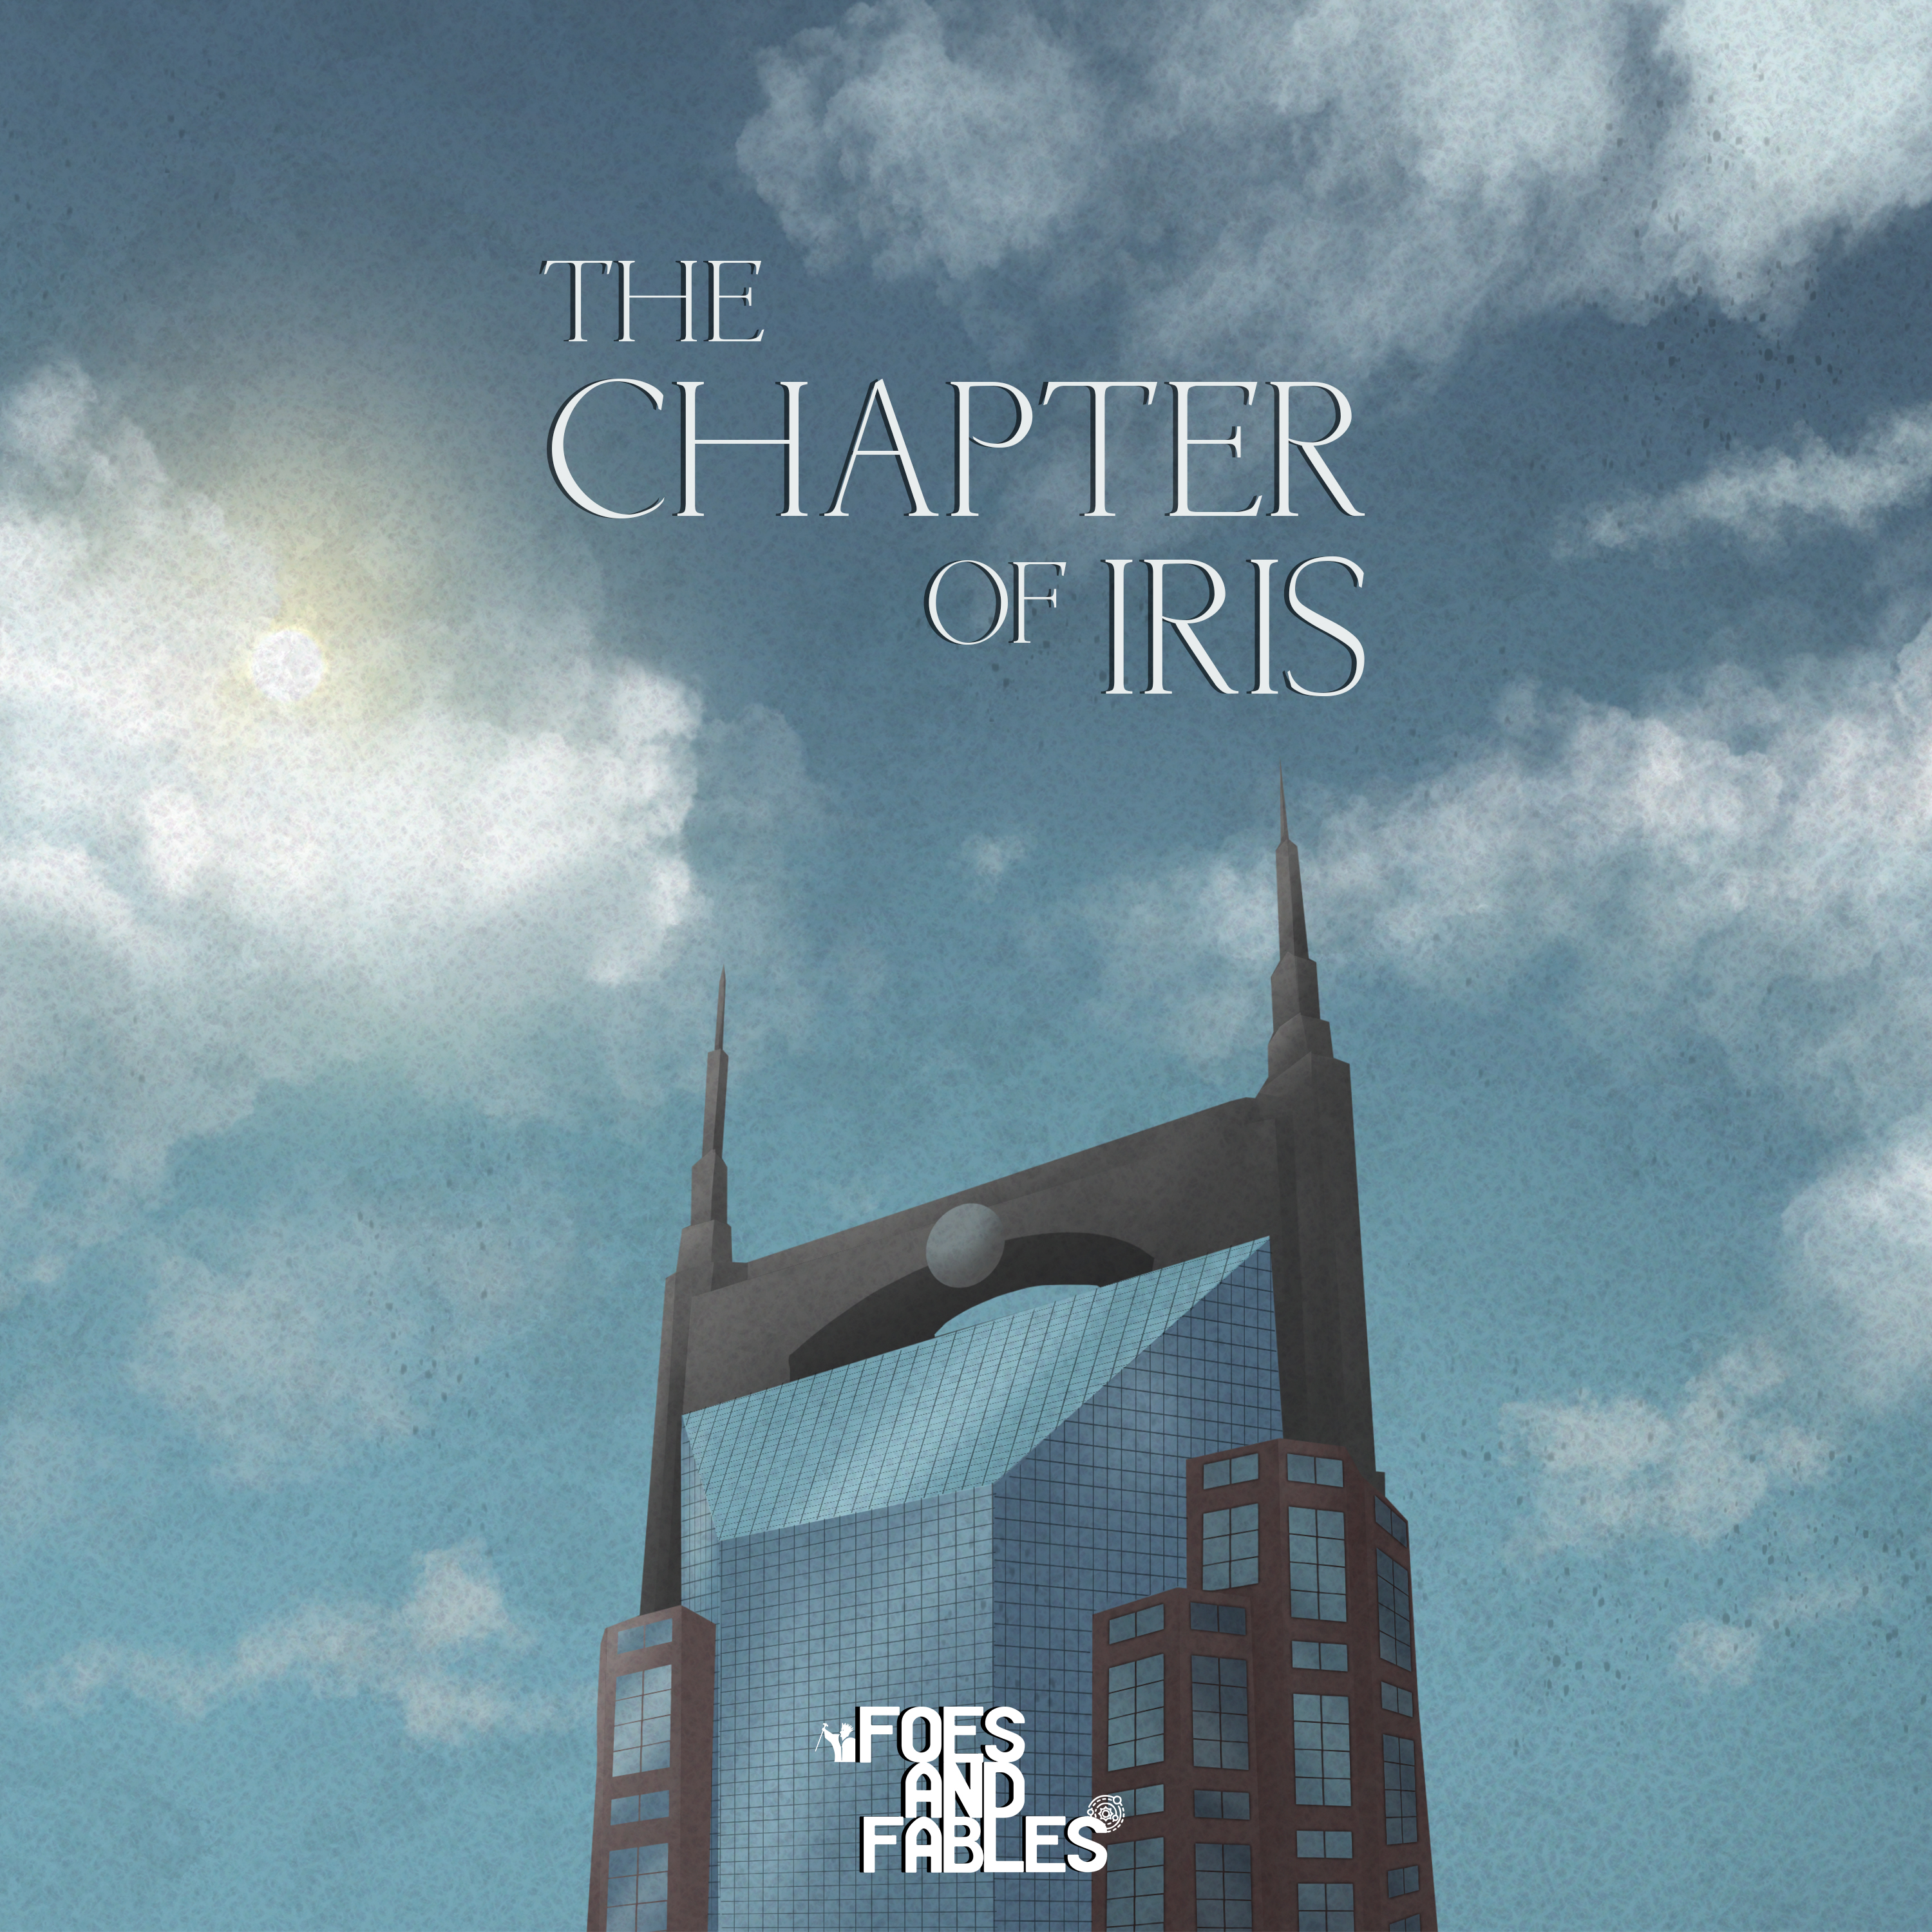 4. The Tomato King&#39;s Offer | The Chapter of Iris